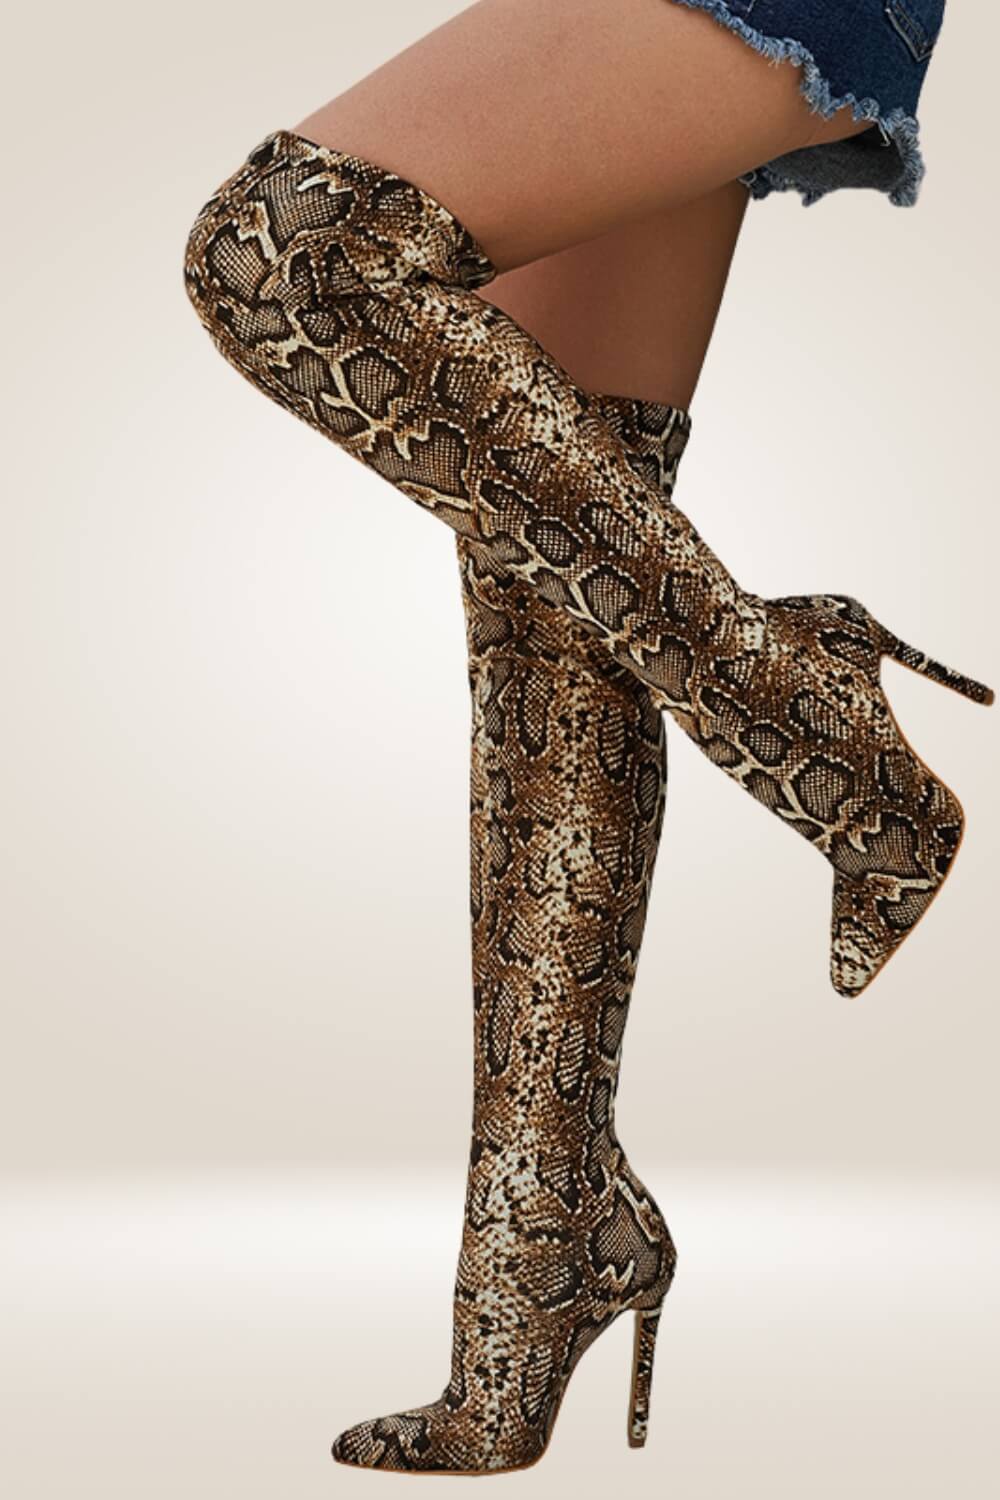 Leopard Over The Knee High Heel Boots - TGC Boutique - Boots